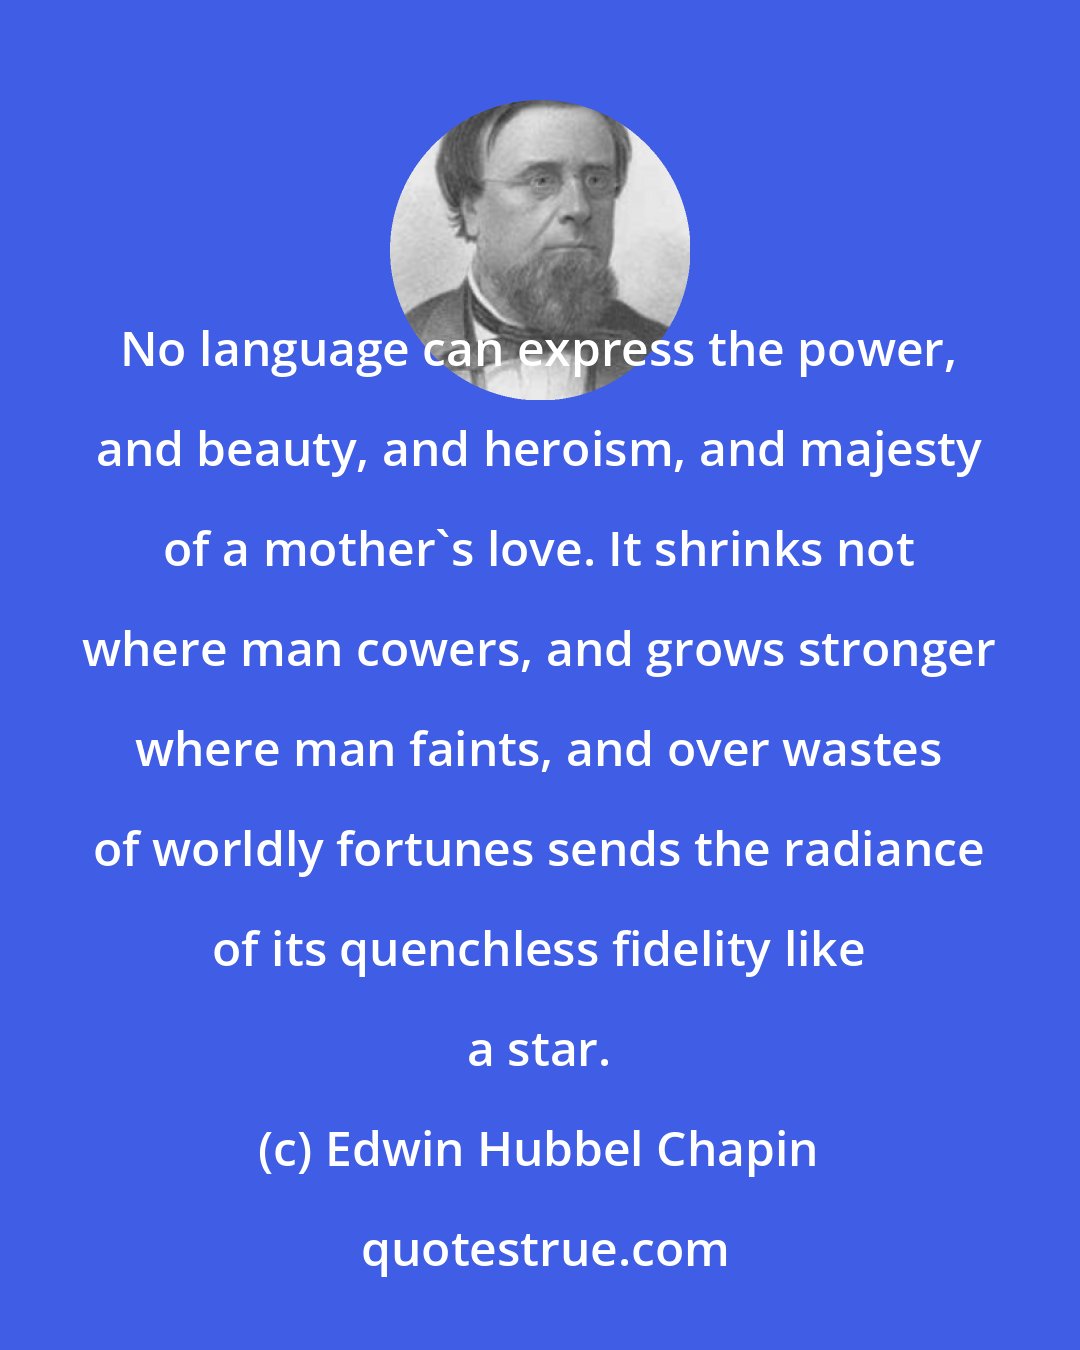 Edwin Hubbel Chapin: No language can express the power, and beauty, and heroism, and majesty of a mother's love. It shrinks not where man cowers, and grows stronger where man faints, and over wastes of worldly fortunes sends the radiance of its quenchless fidelity like a star.